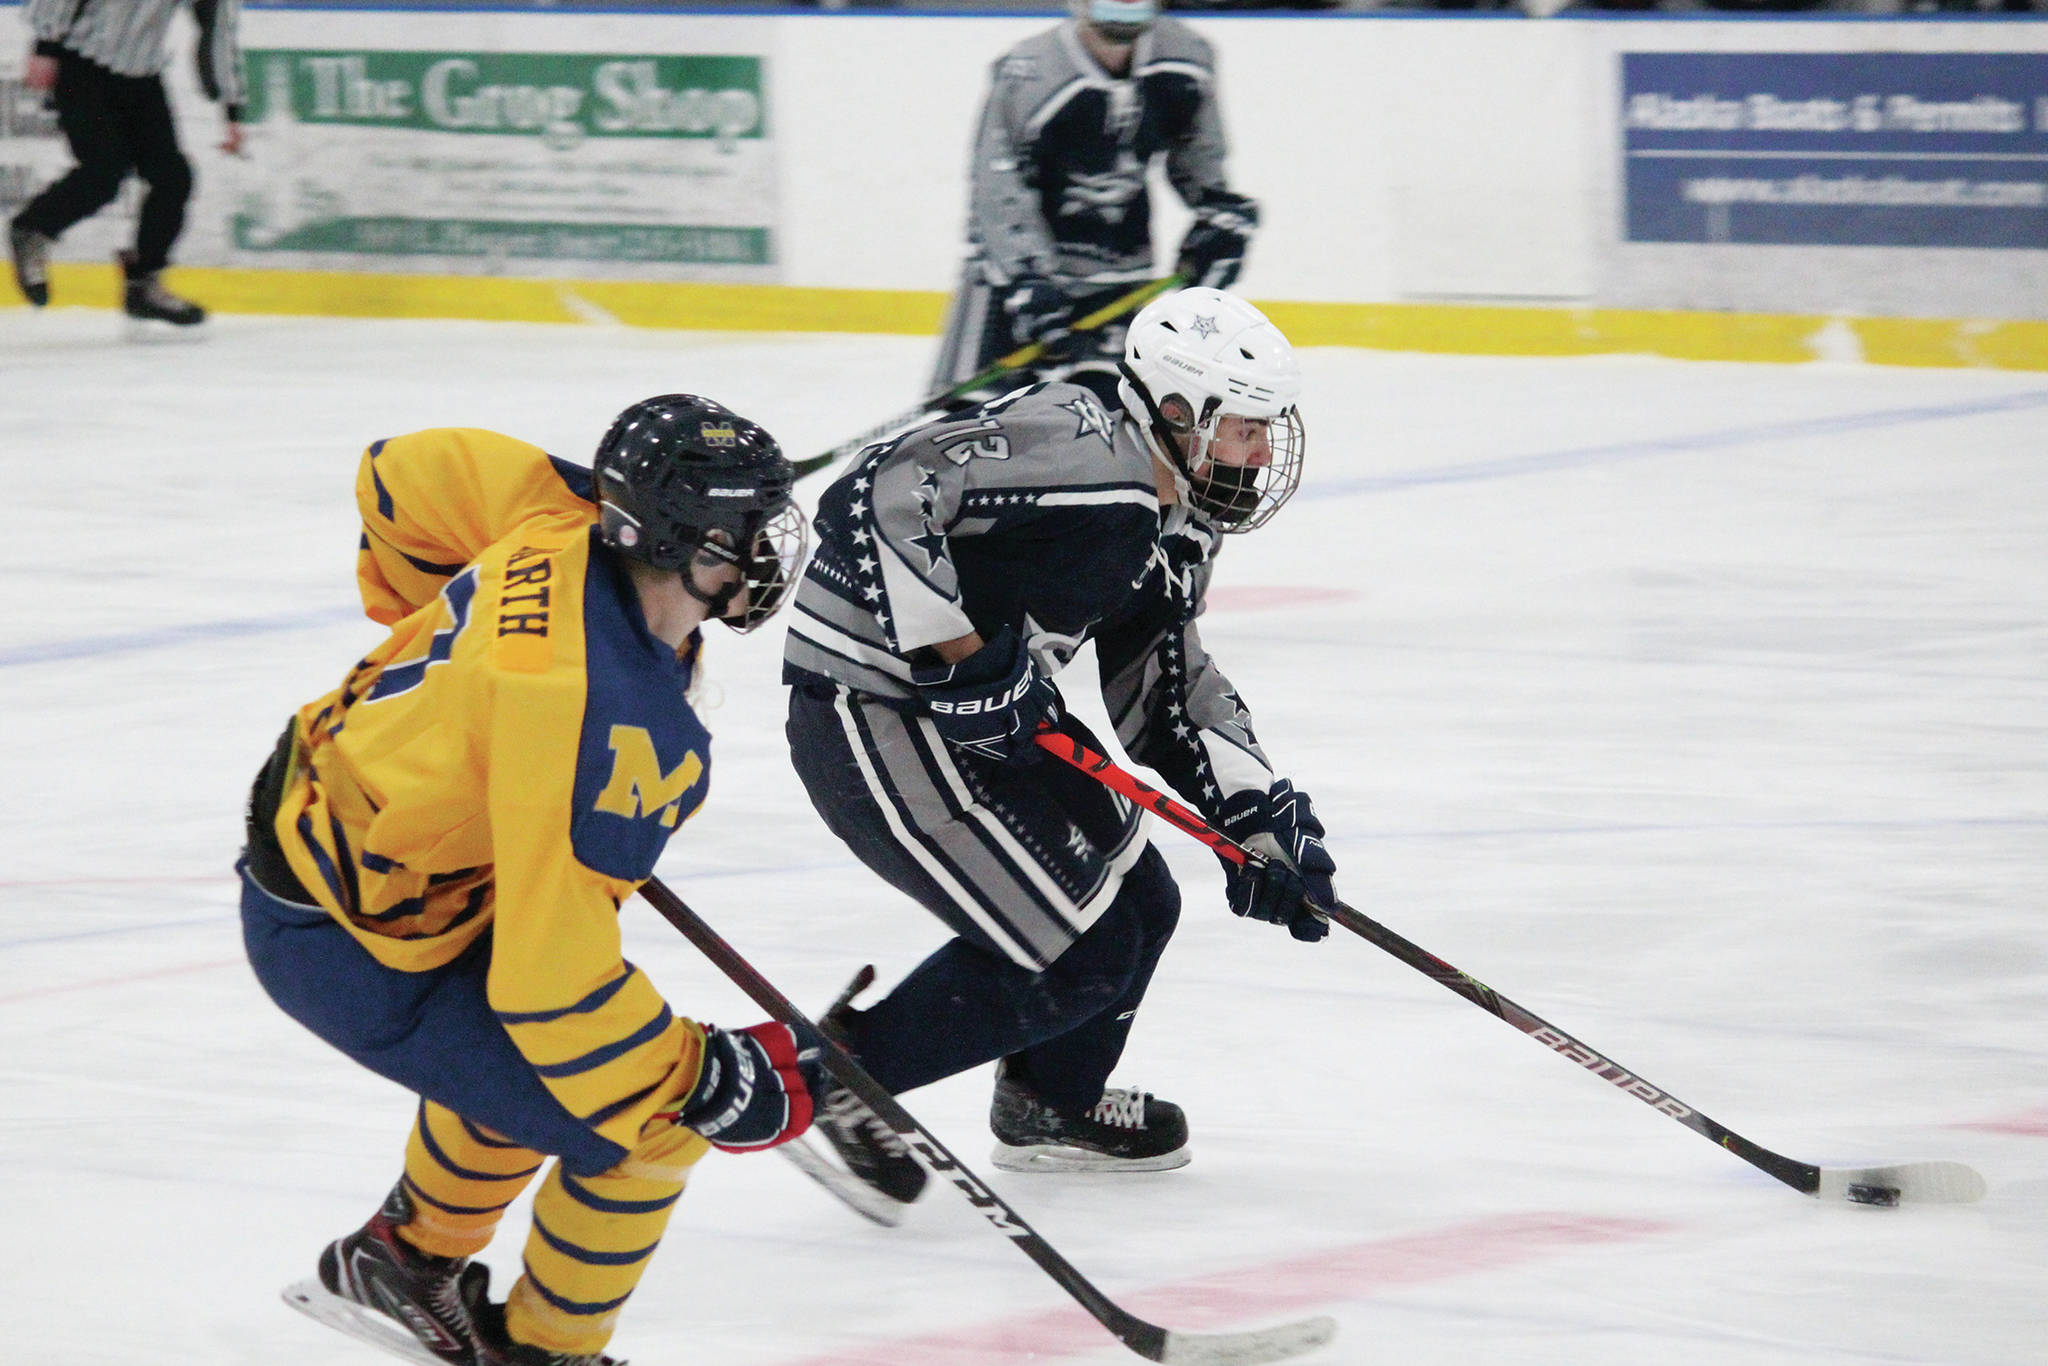 Soldotna’s Aiden Burcham controls the puck under pressure from Homer’s Brock Barth during a Saturday, Jan. 23, 2021 hockey game between the two schools at Kevin Bell Arena in Homer, Alaska. (Photo by Megan Pacer/Homer News)